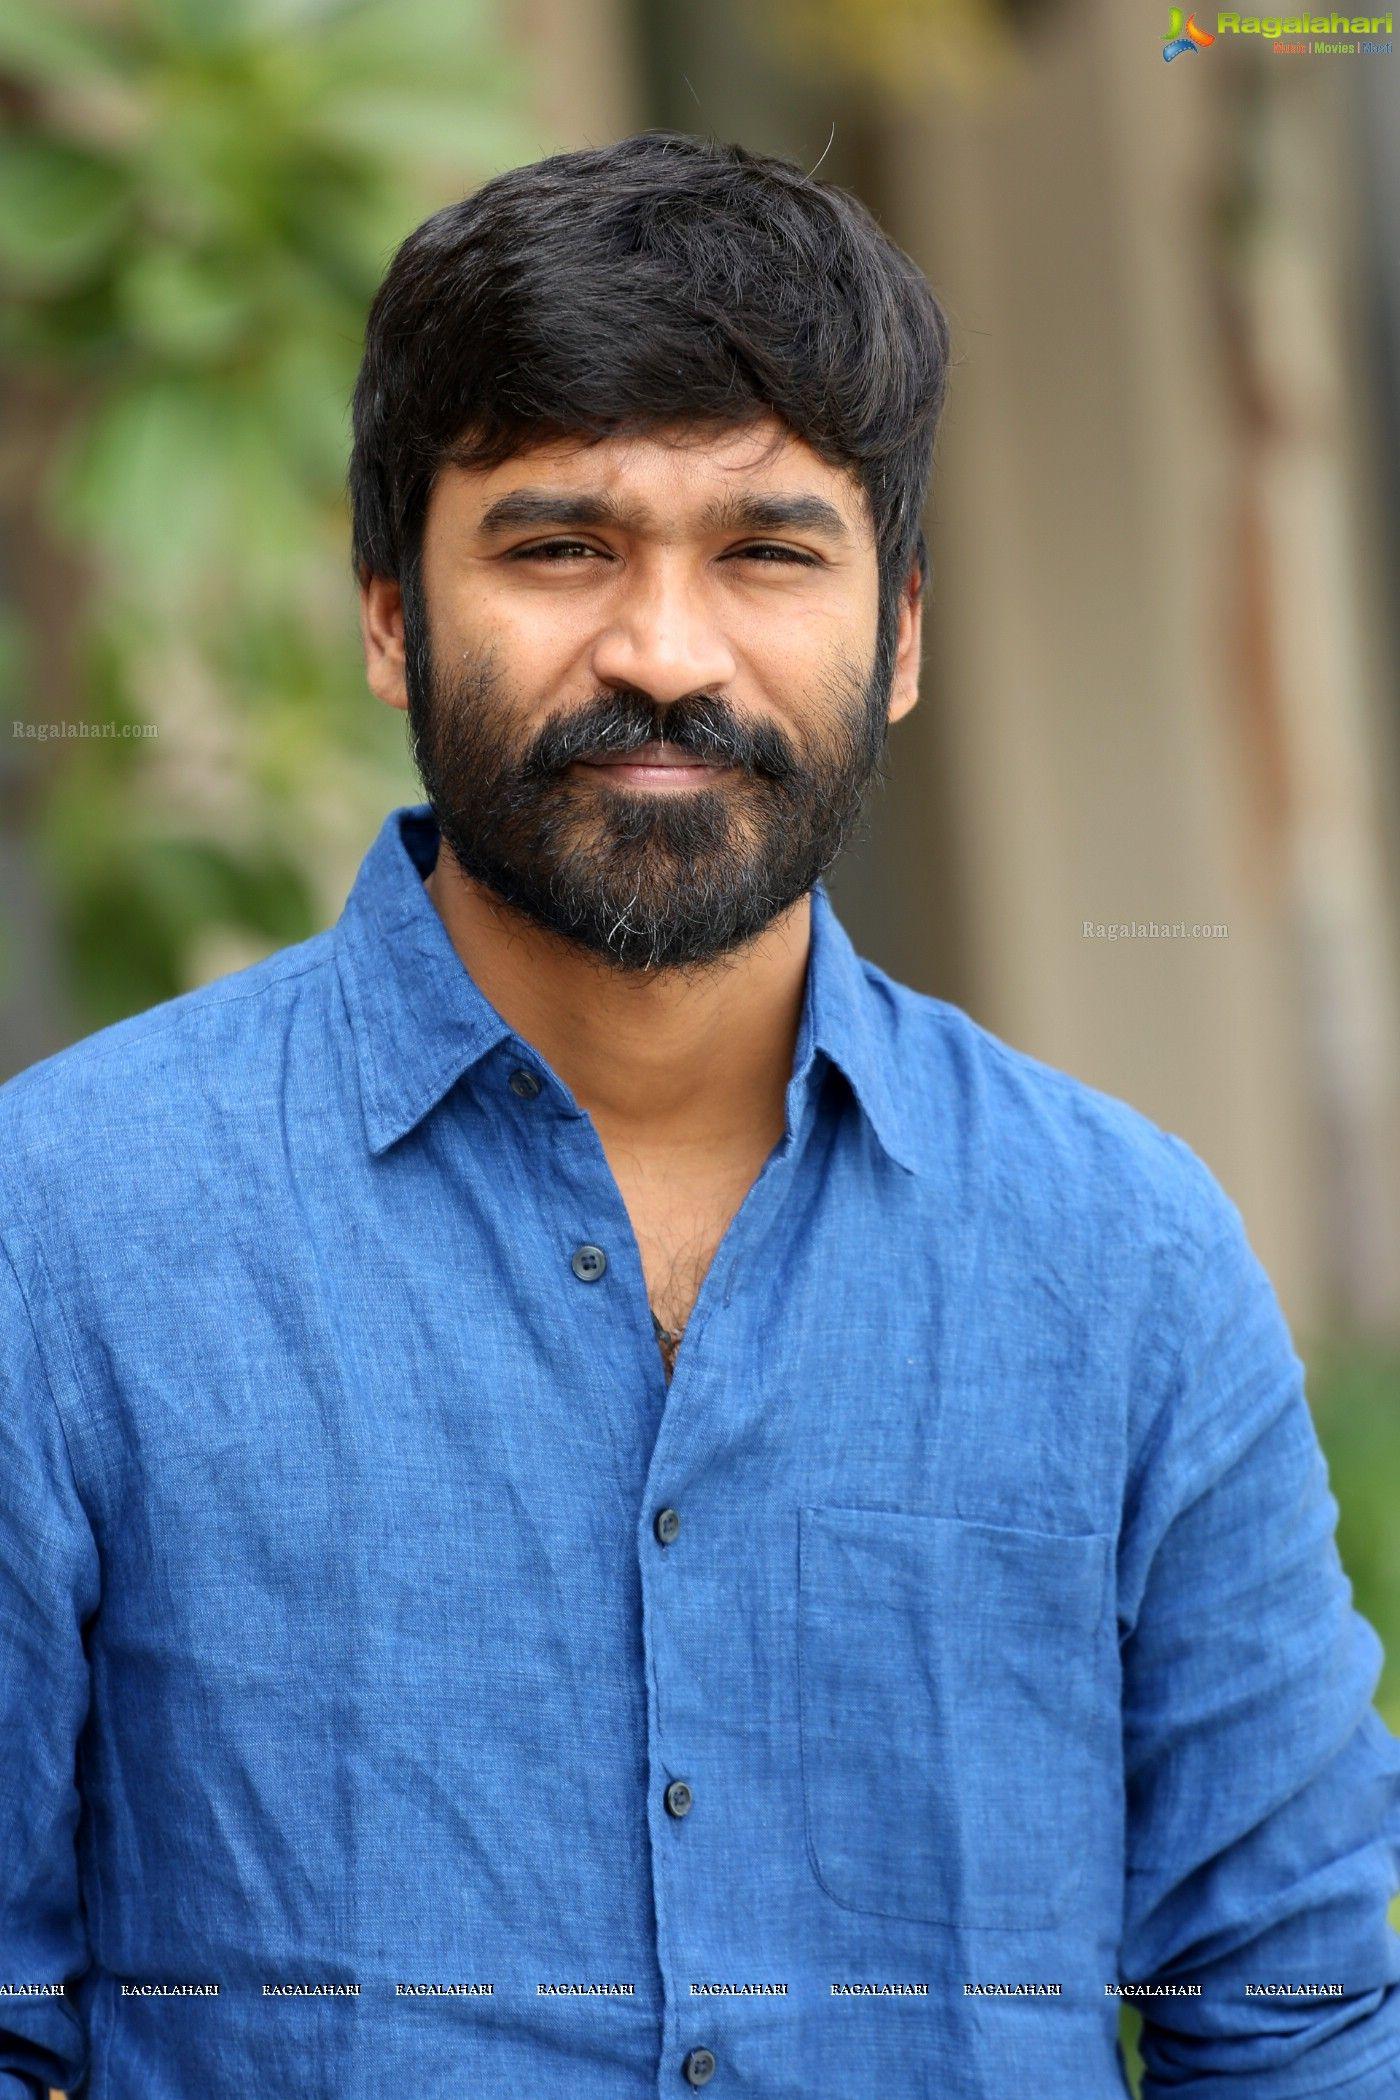 Dhanush (Posters) Image 16. Latest Actor Galleries, Image, Photo